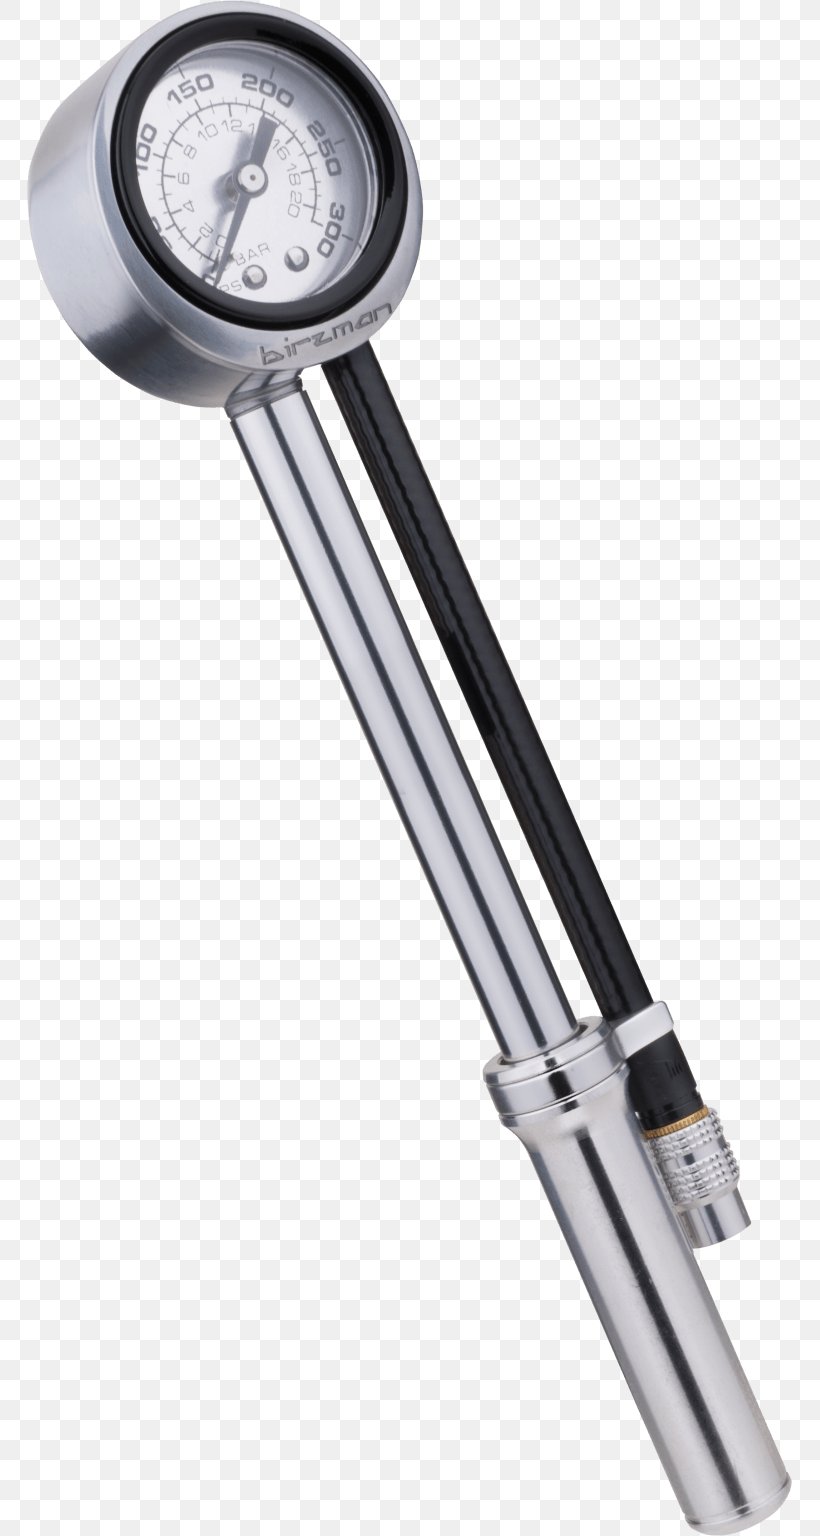 Bicycle Pumps Hand Pump Bicycle Forks, PNG, 765x1536px, Pump, Bicycle, Bicycle Forks, Bicycle Industry, Bicycle Pumps Download Free